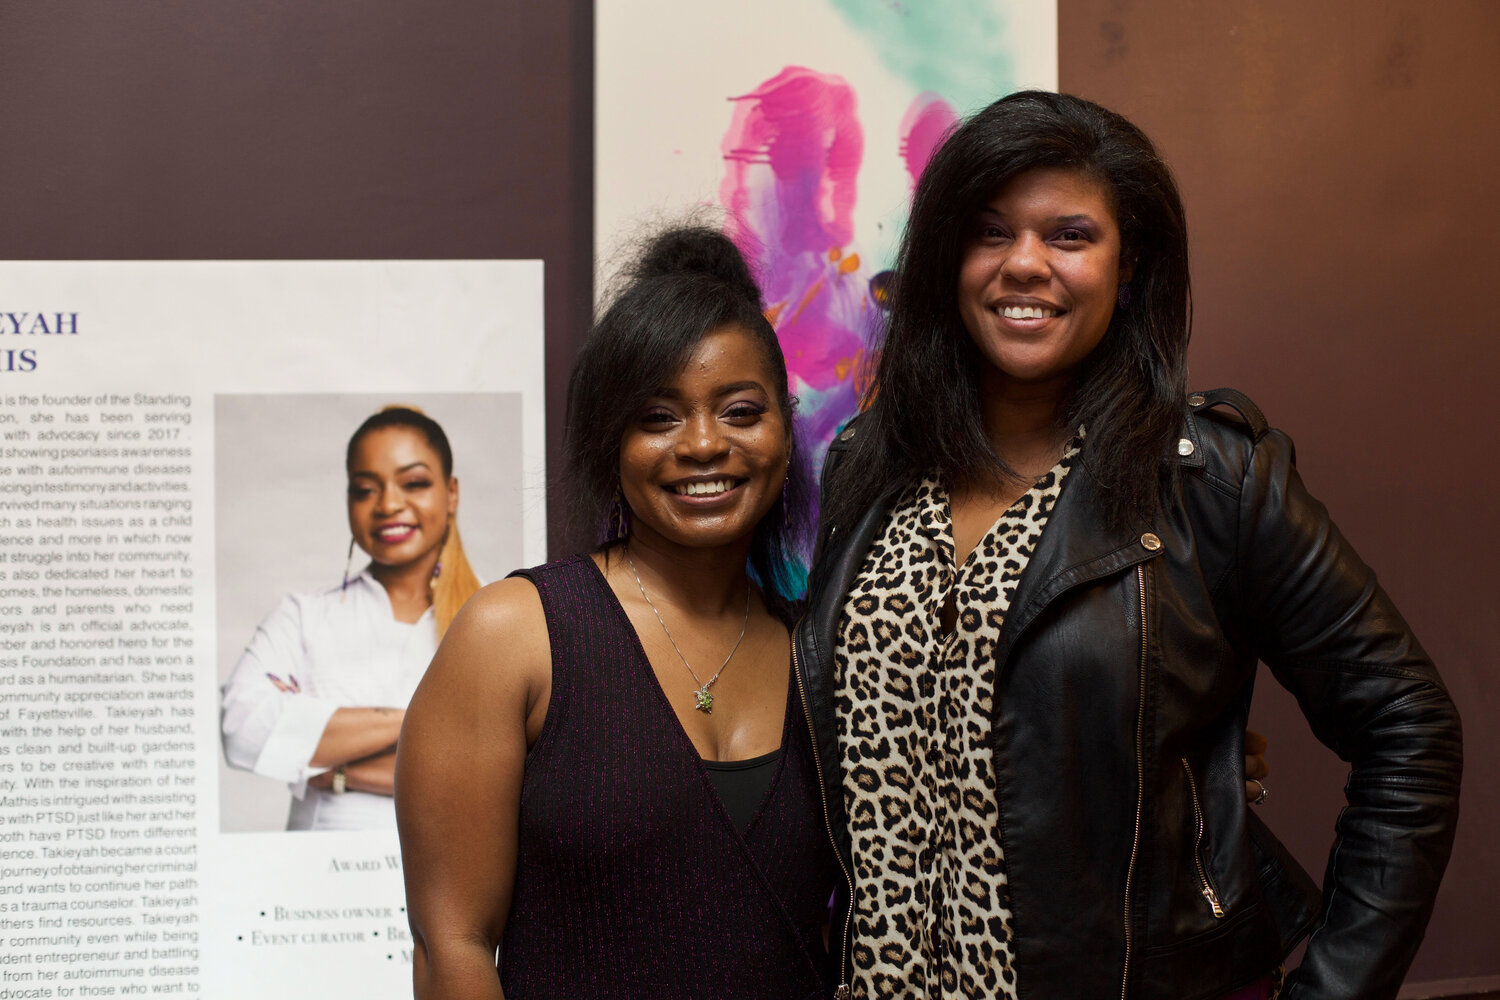 Takieyah Mathis and Dominique Womack.